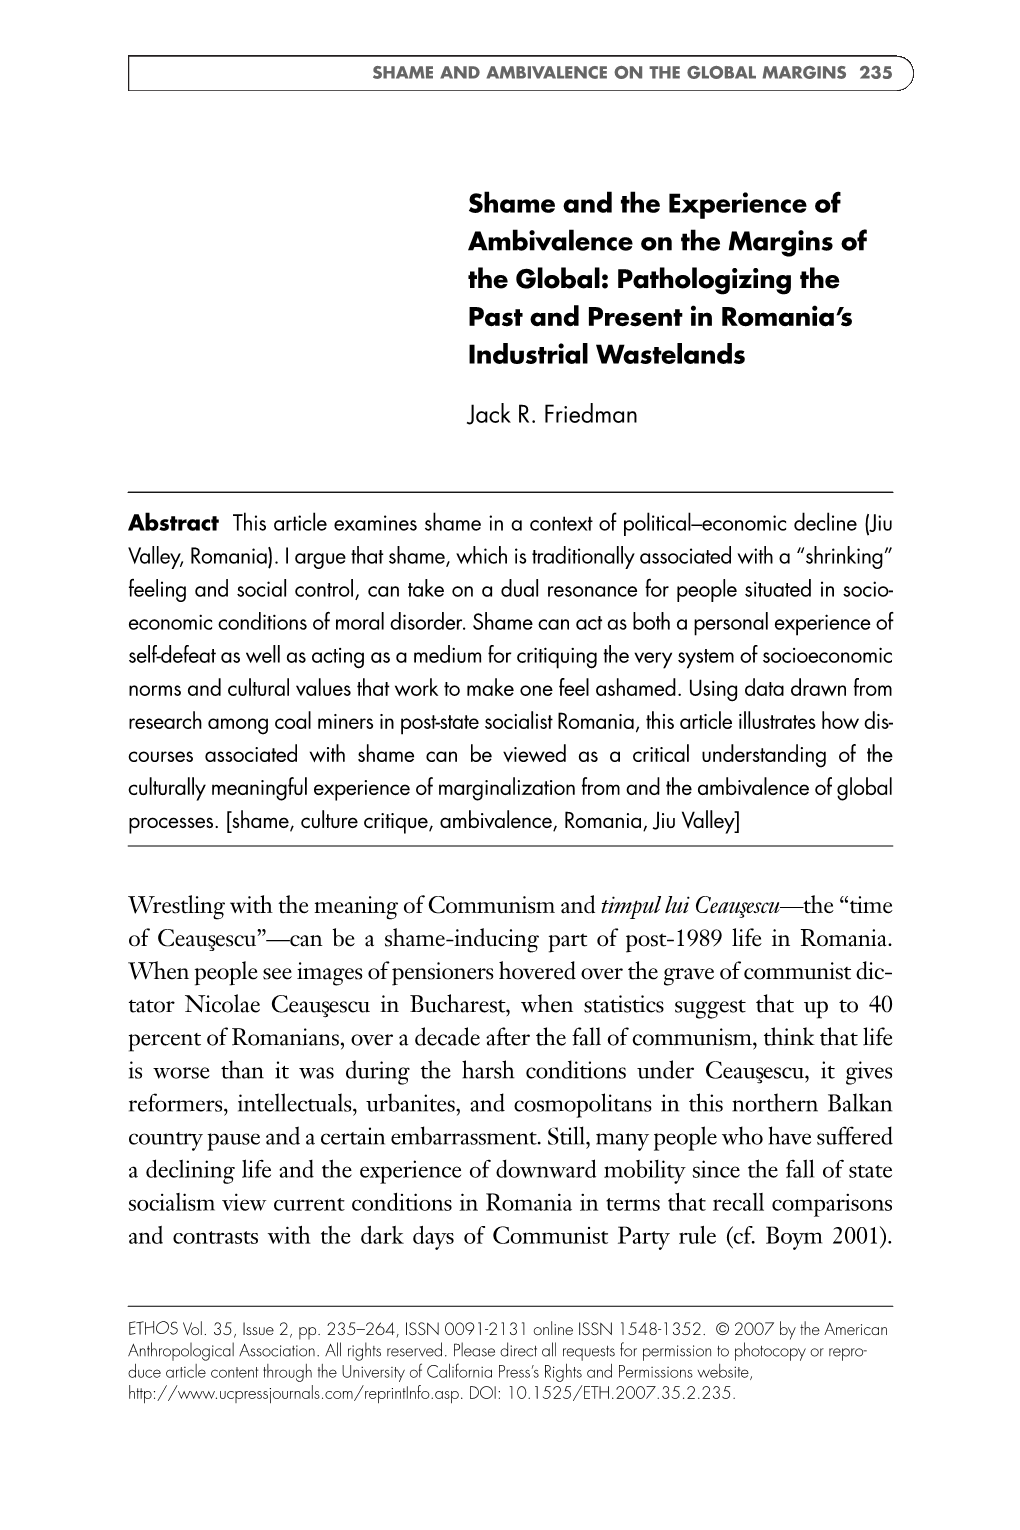 Shame and the Experience of Ambivalence on the Margins of the Global: Pathologizing the Past and Present in Romania’S Industrial Wastelands